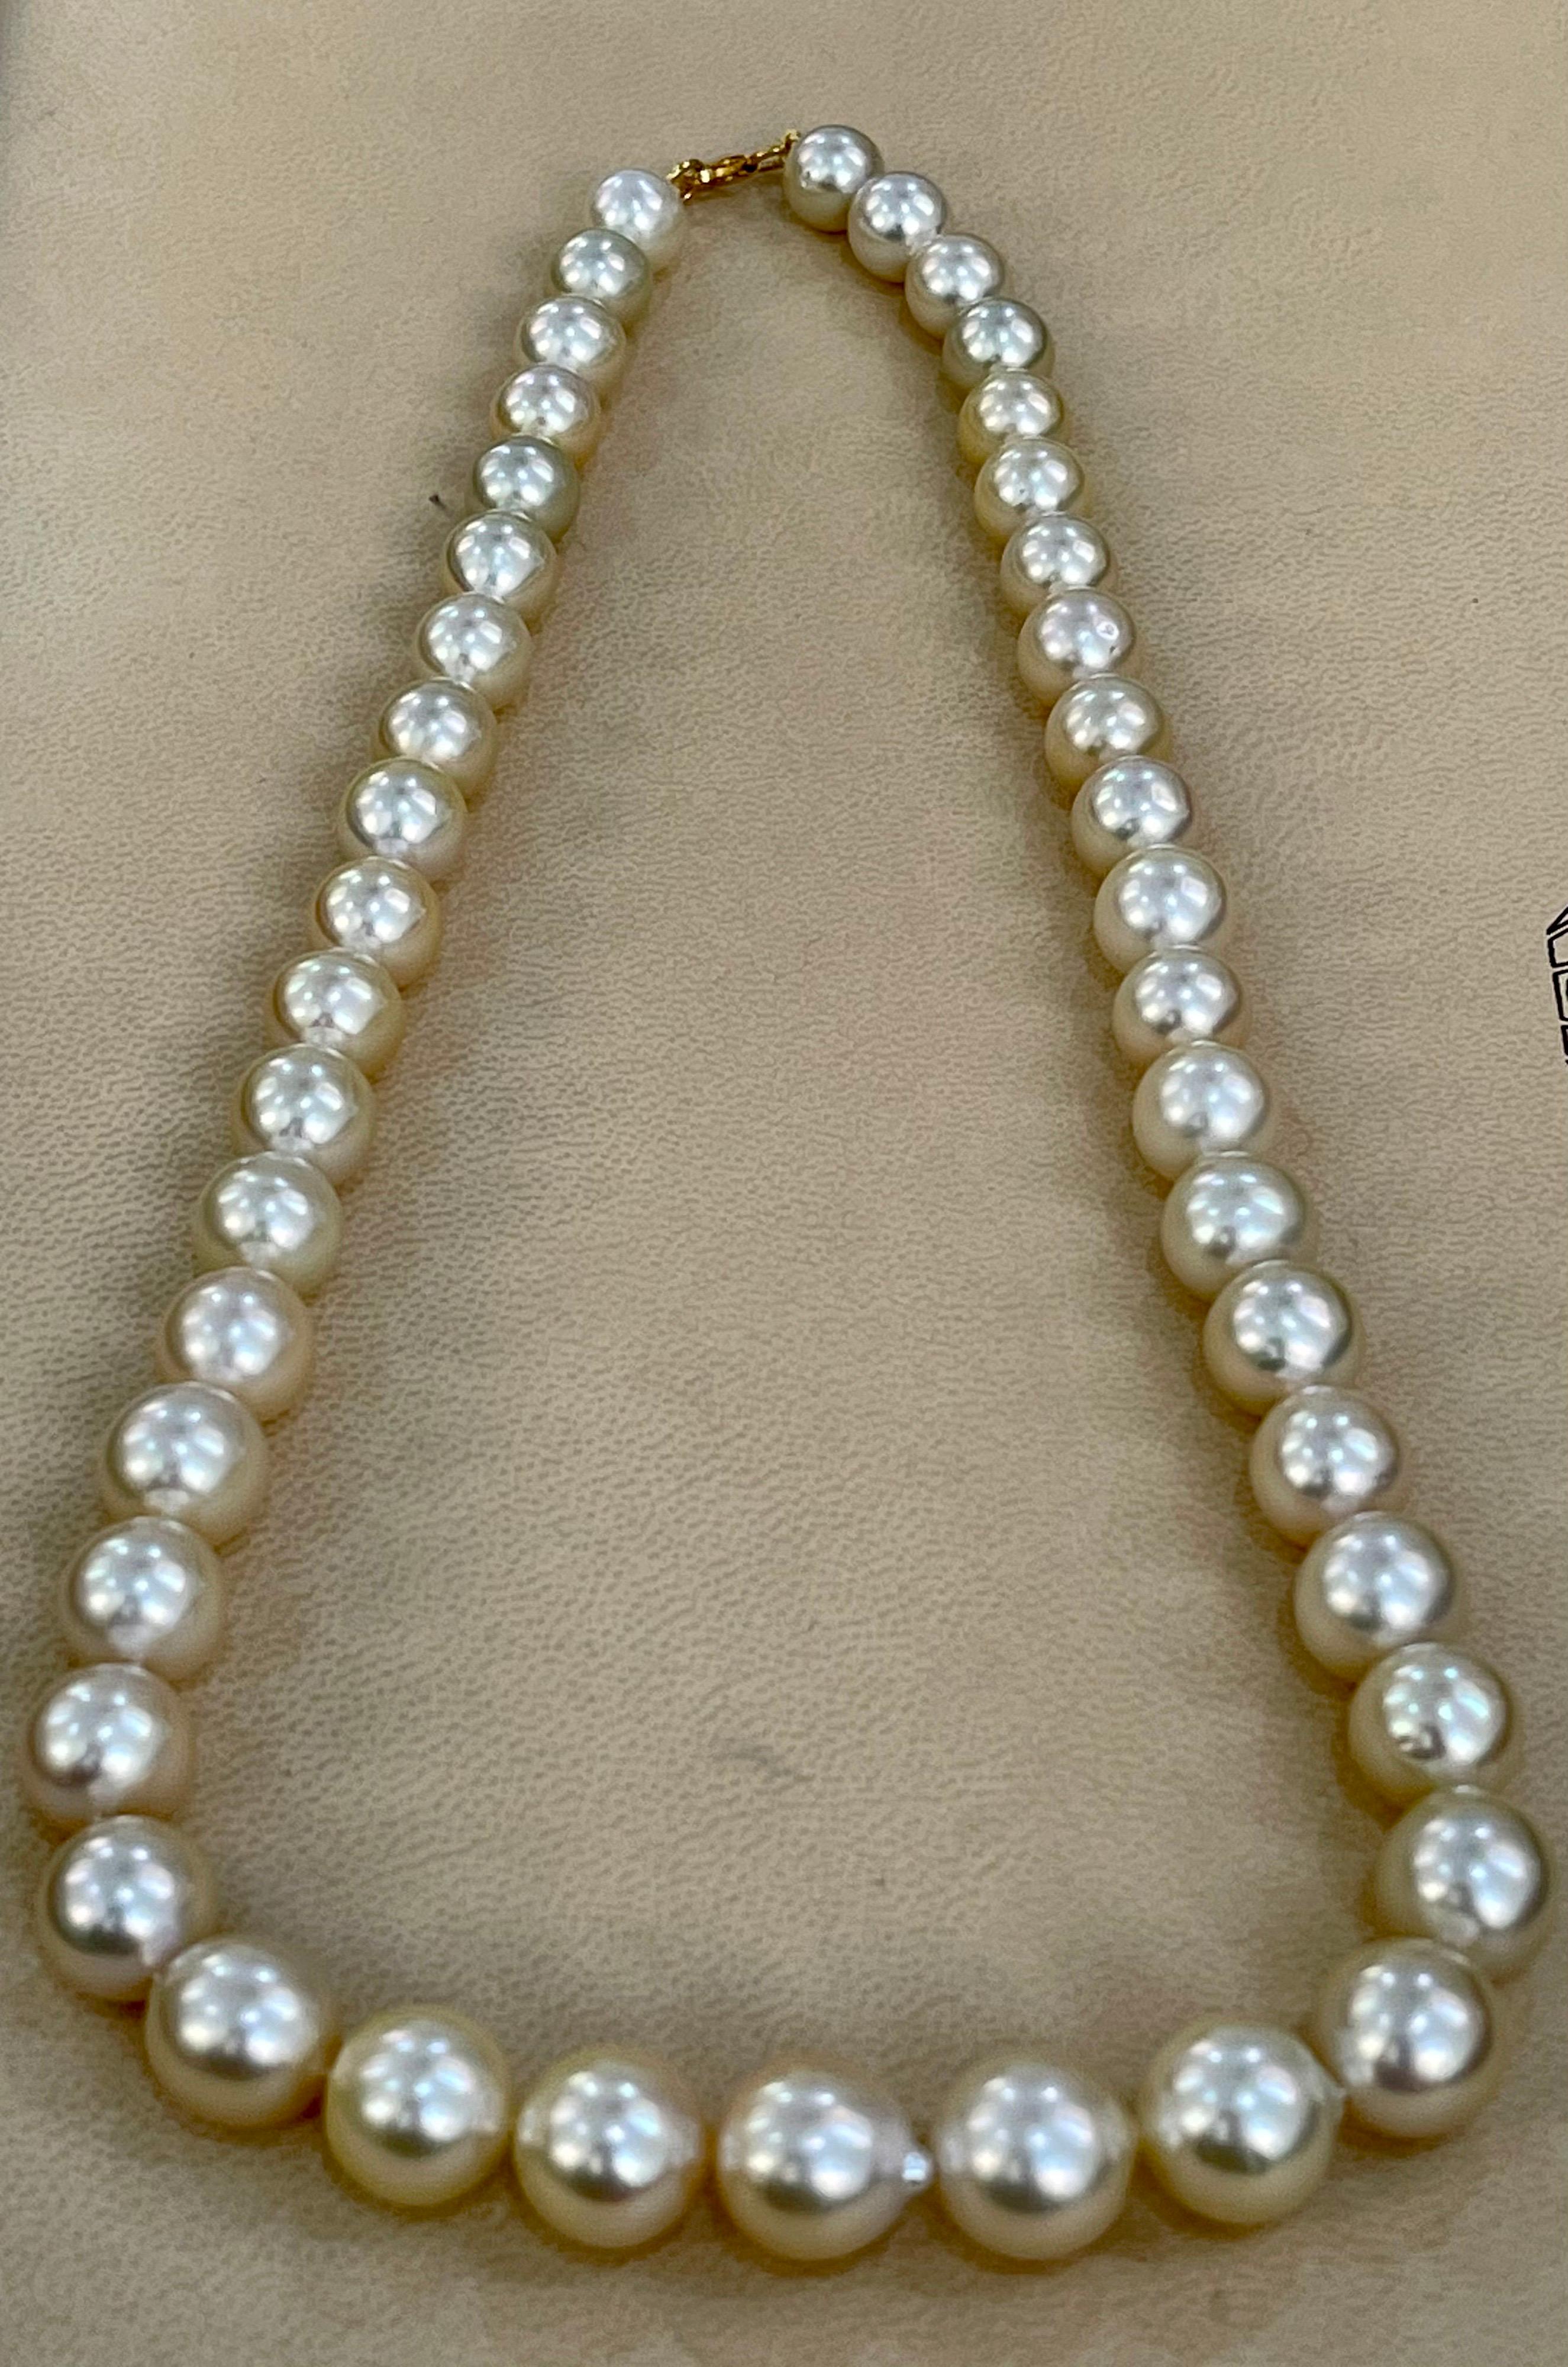 Graduating Cream Color South Sea Pearls Necklace 14 Karat Yellow Gold Clasp For Sale 7